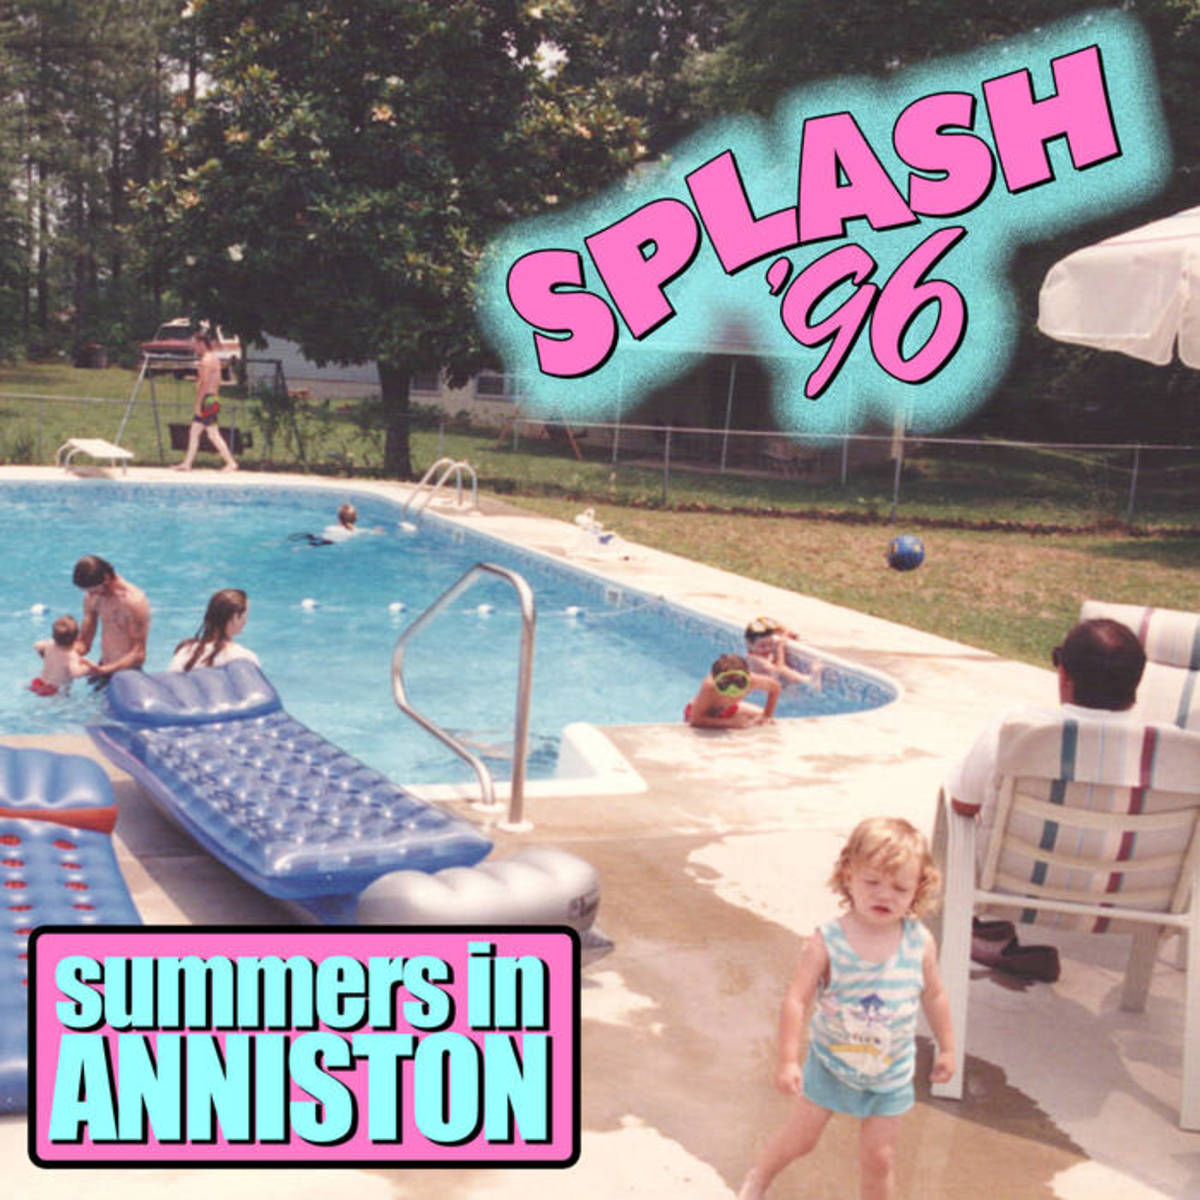 synth-album-review-summers-in-anniston-by-splash-96